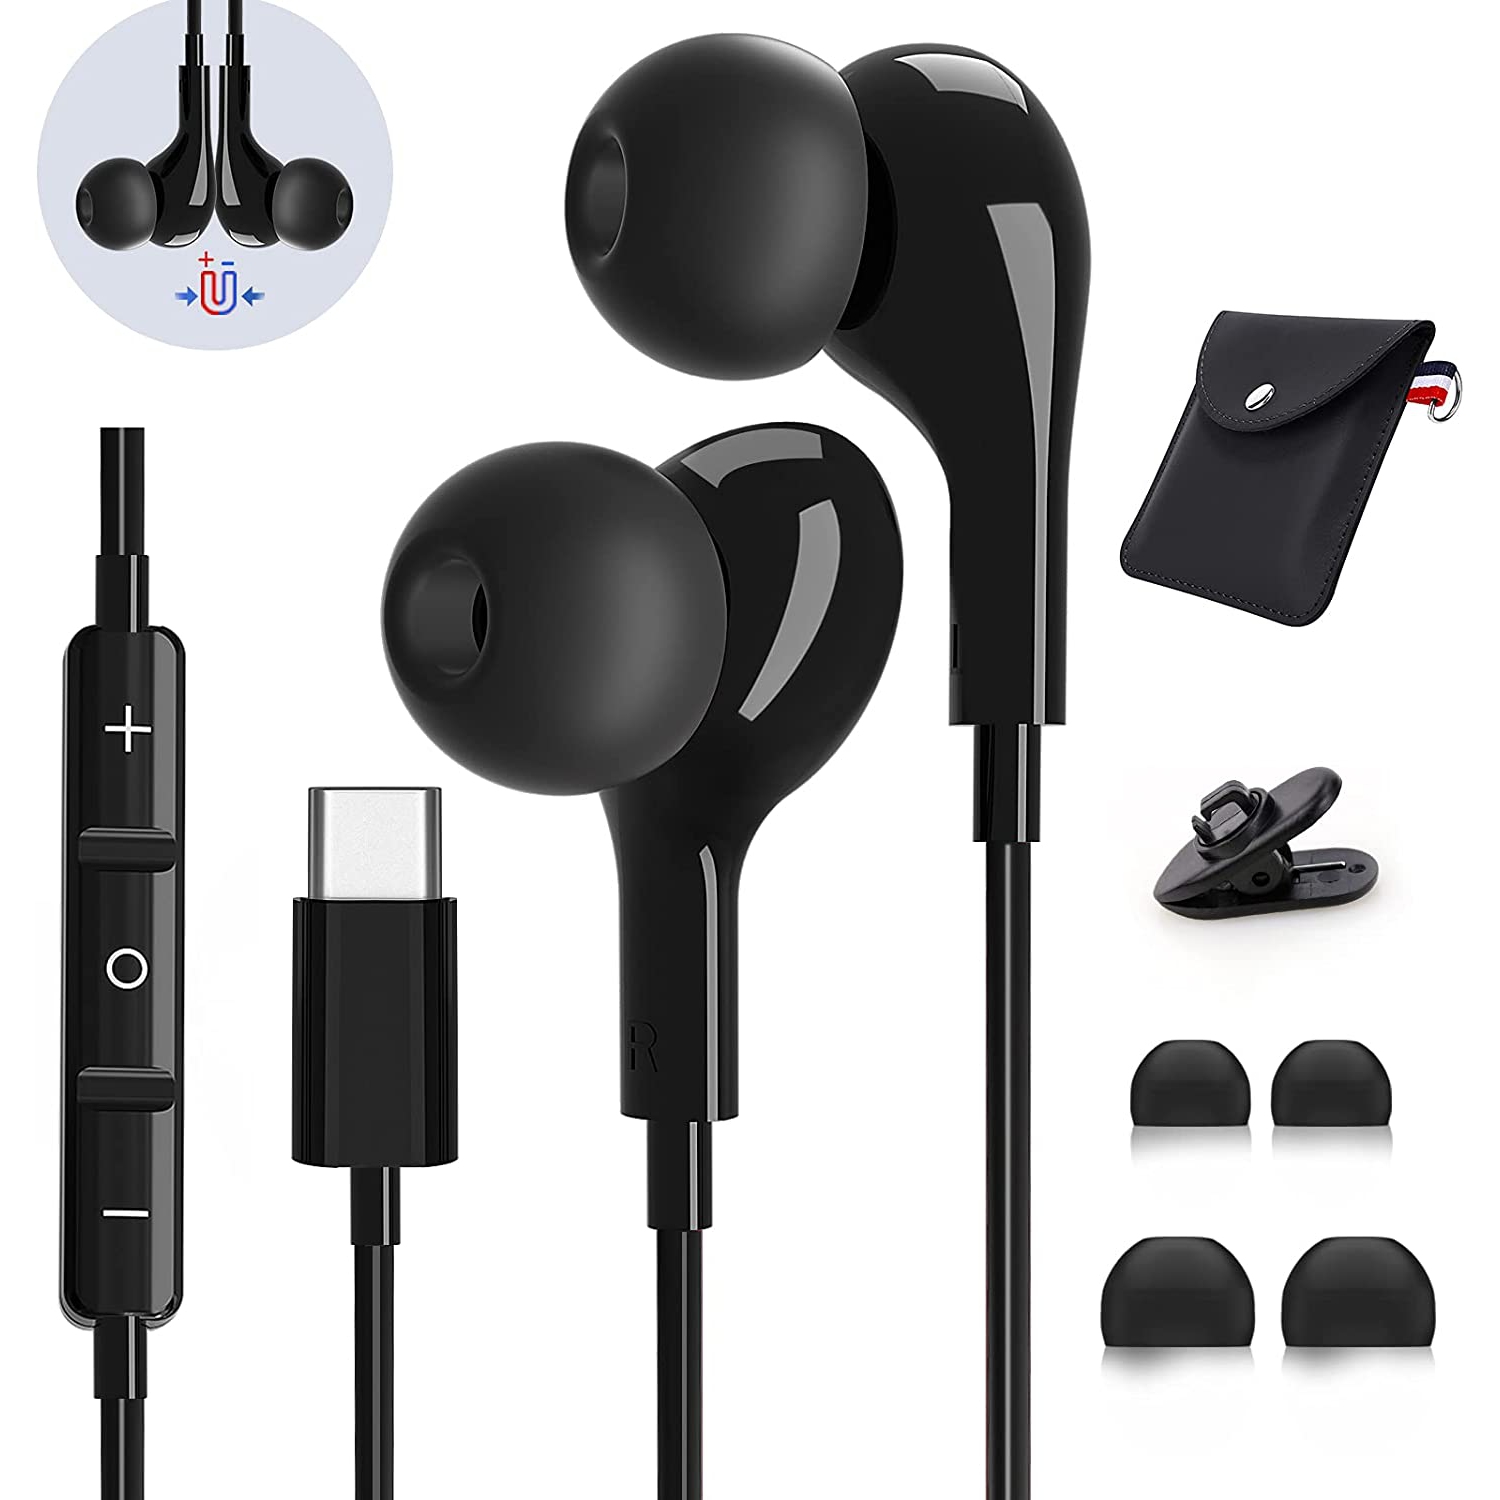 Dolaer USB C Headphones, Magnetic In-Ear USB C Earbuds with Microphone Stereo USB C Earphones Noise Cancelling Headphones for iPad Mini 6 Samsung Galaxy S21 FE S20 Z Flip 3 Note 2